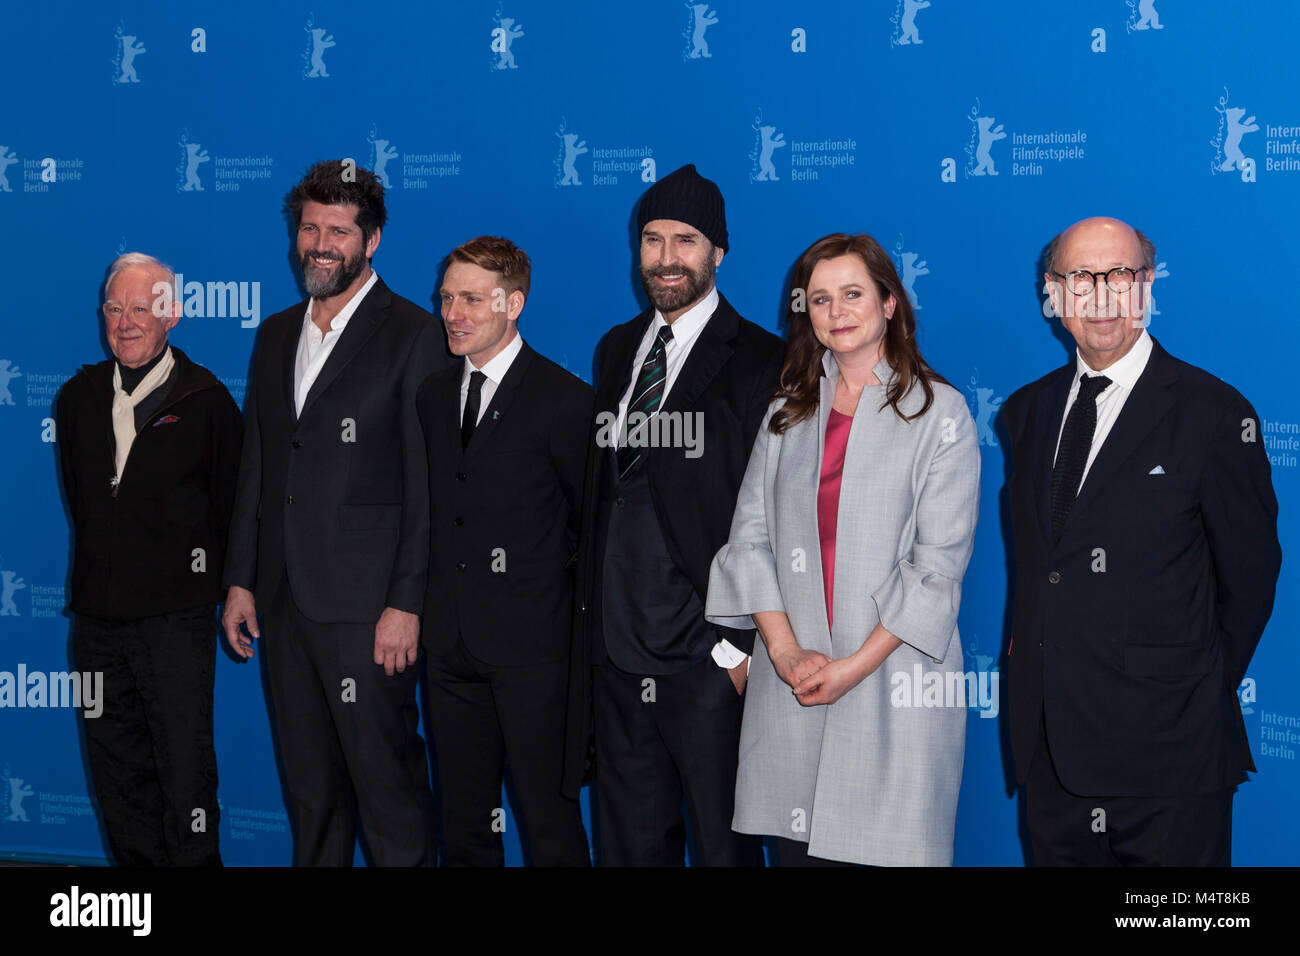 Brian Morris, John Conroy, Edwin Thomas, Rupert Everett und Emily Watson (L-R) at photo call of Berlinale for the premiere 'Transit' on 17th of February 2018 in Berlin Credit: Stefan Papp/Alamy Live News Stock Photo